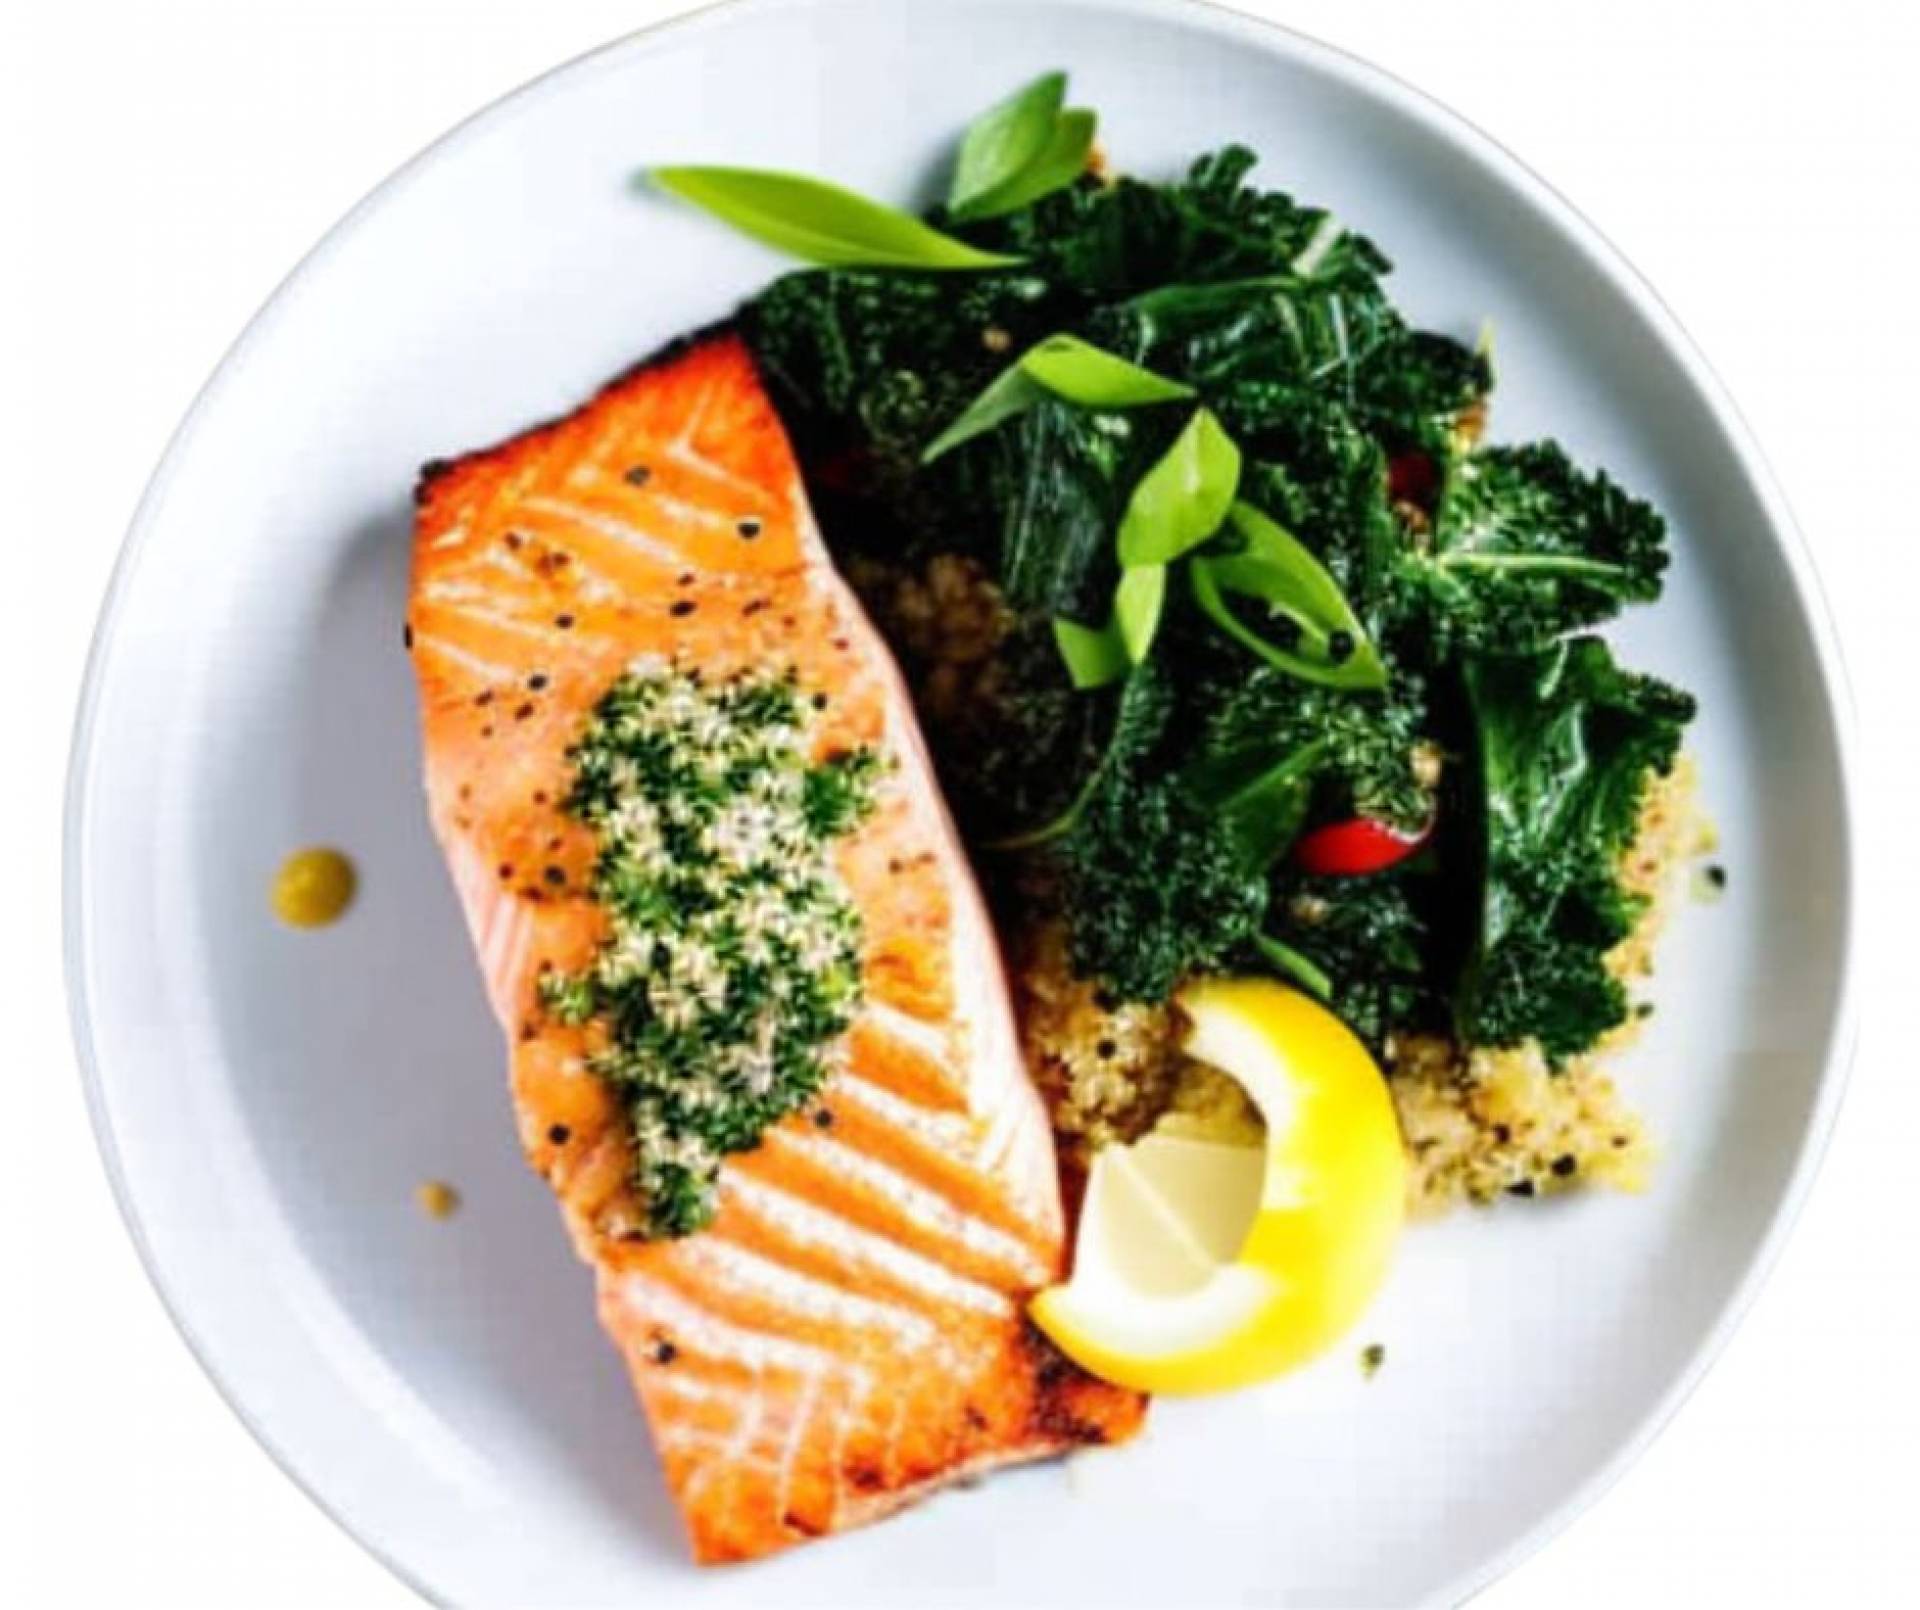 Five Spice-Rubbed Salmon Fillet with Crunchy Quinoa